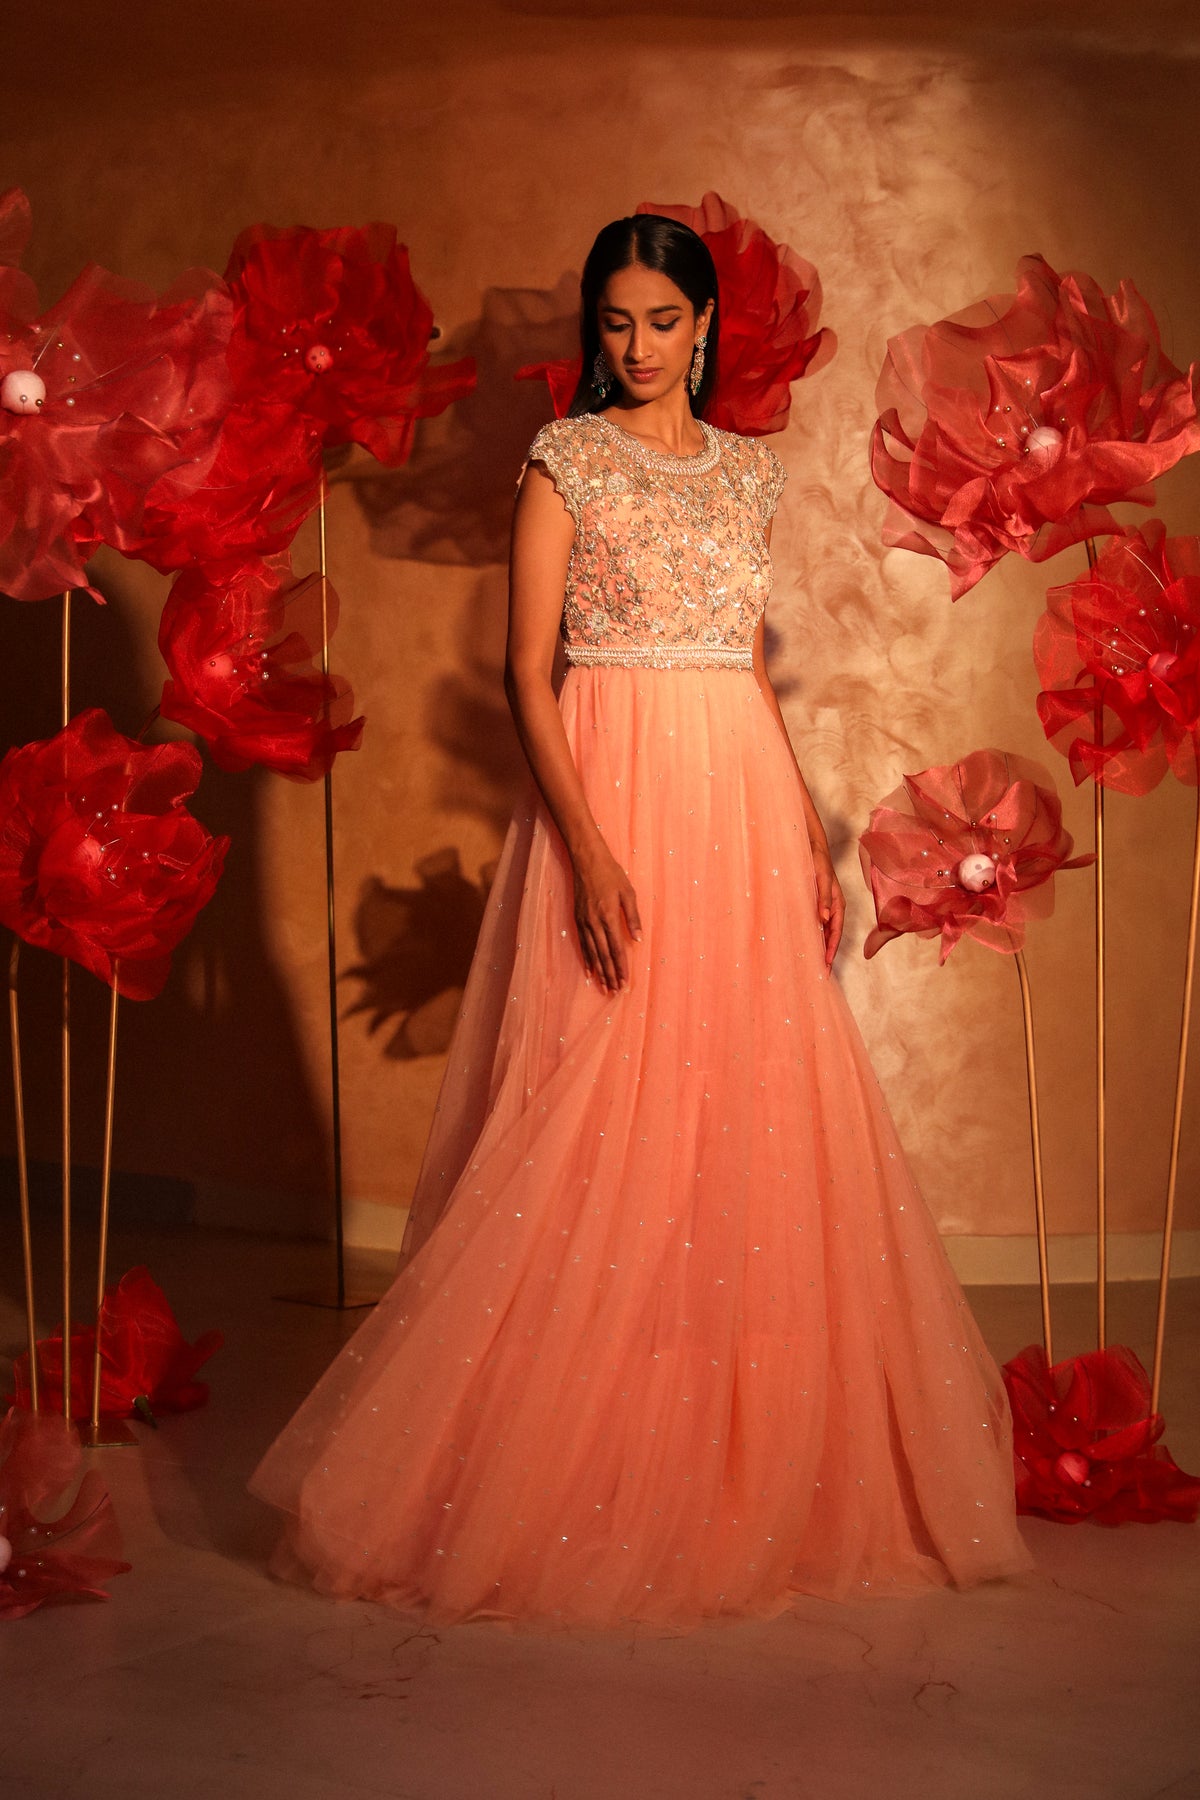 Peotic peach embroided gown